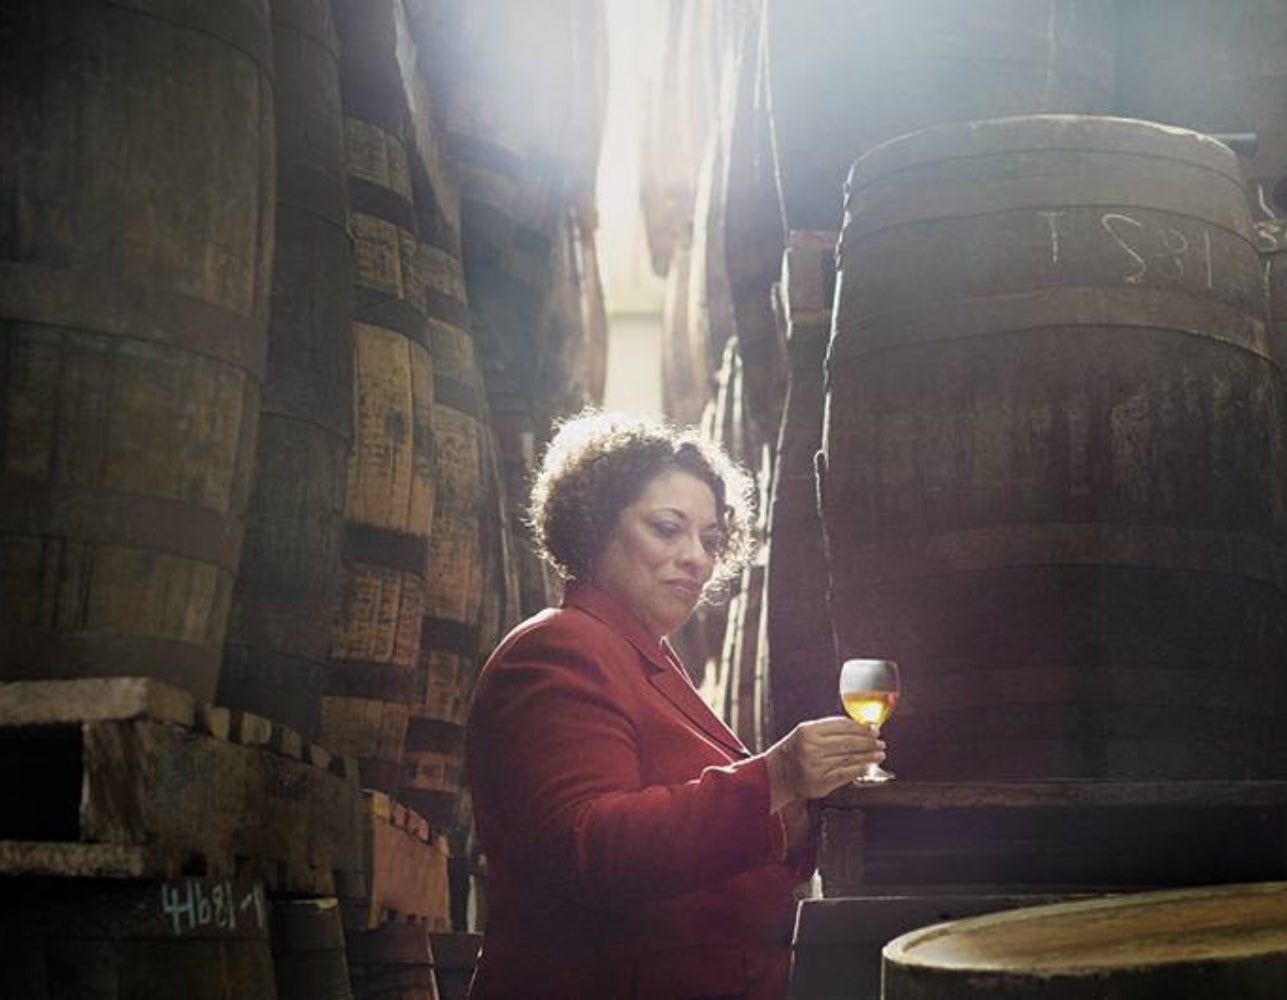 Let's Toast: Joy Spence Is The First Woman Master Blender And After 40 Years, She's Still On Top